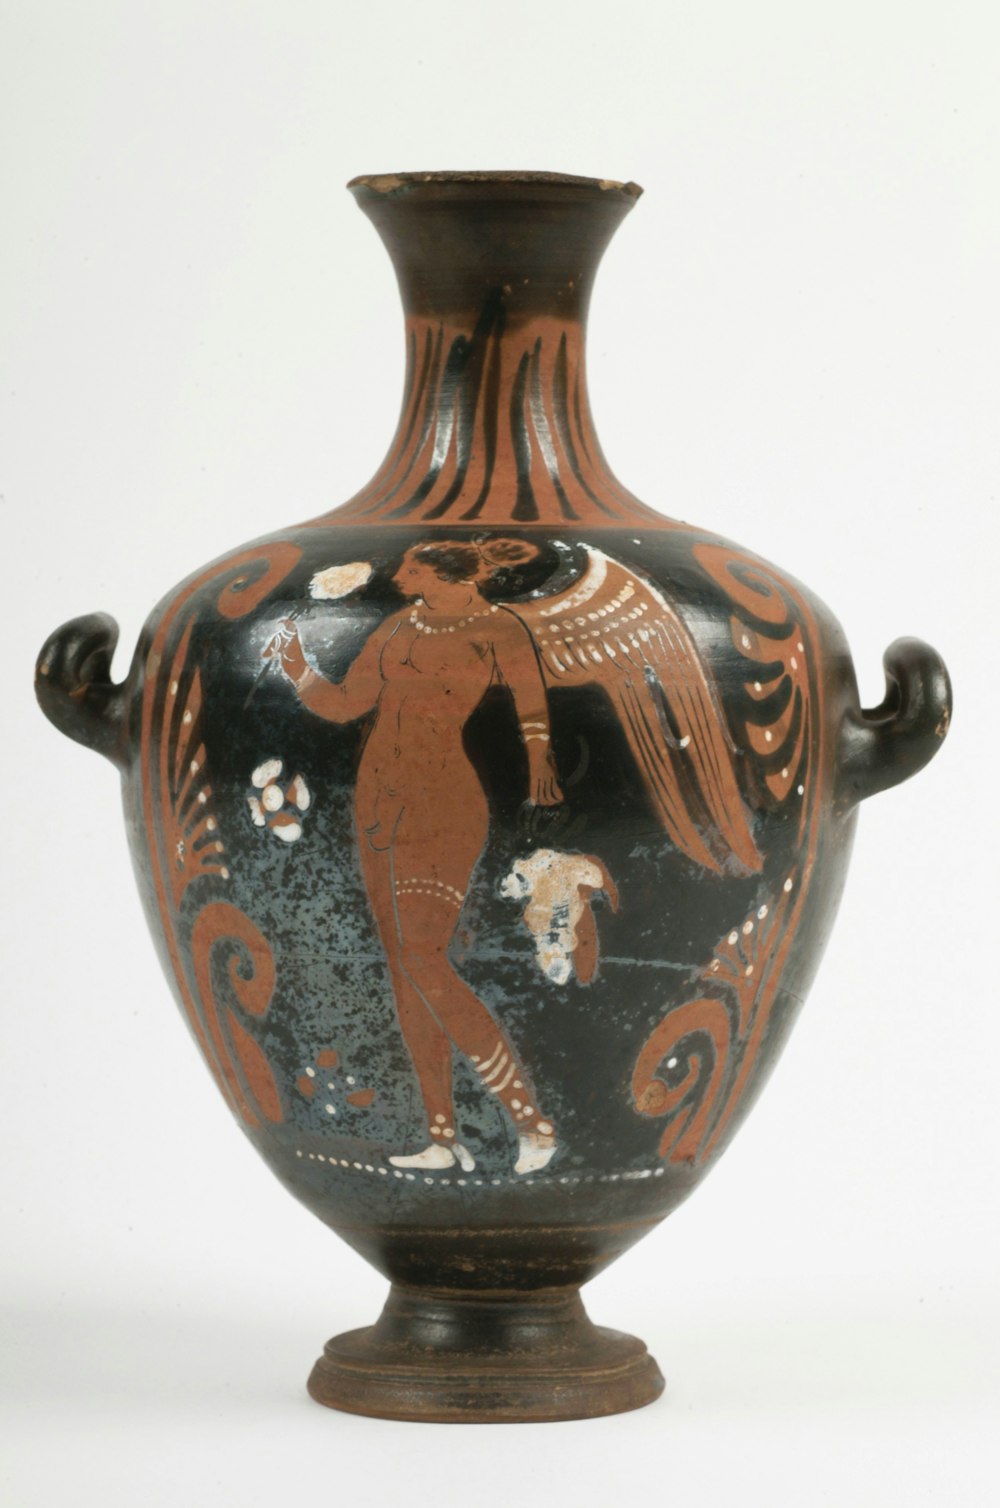 a black and red vase with a bird on it